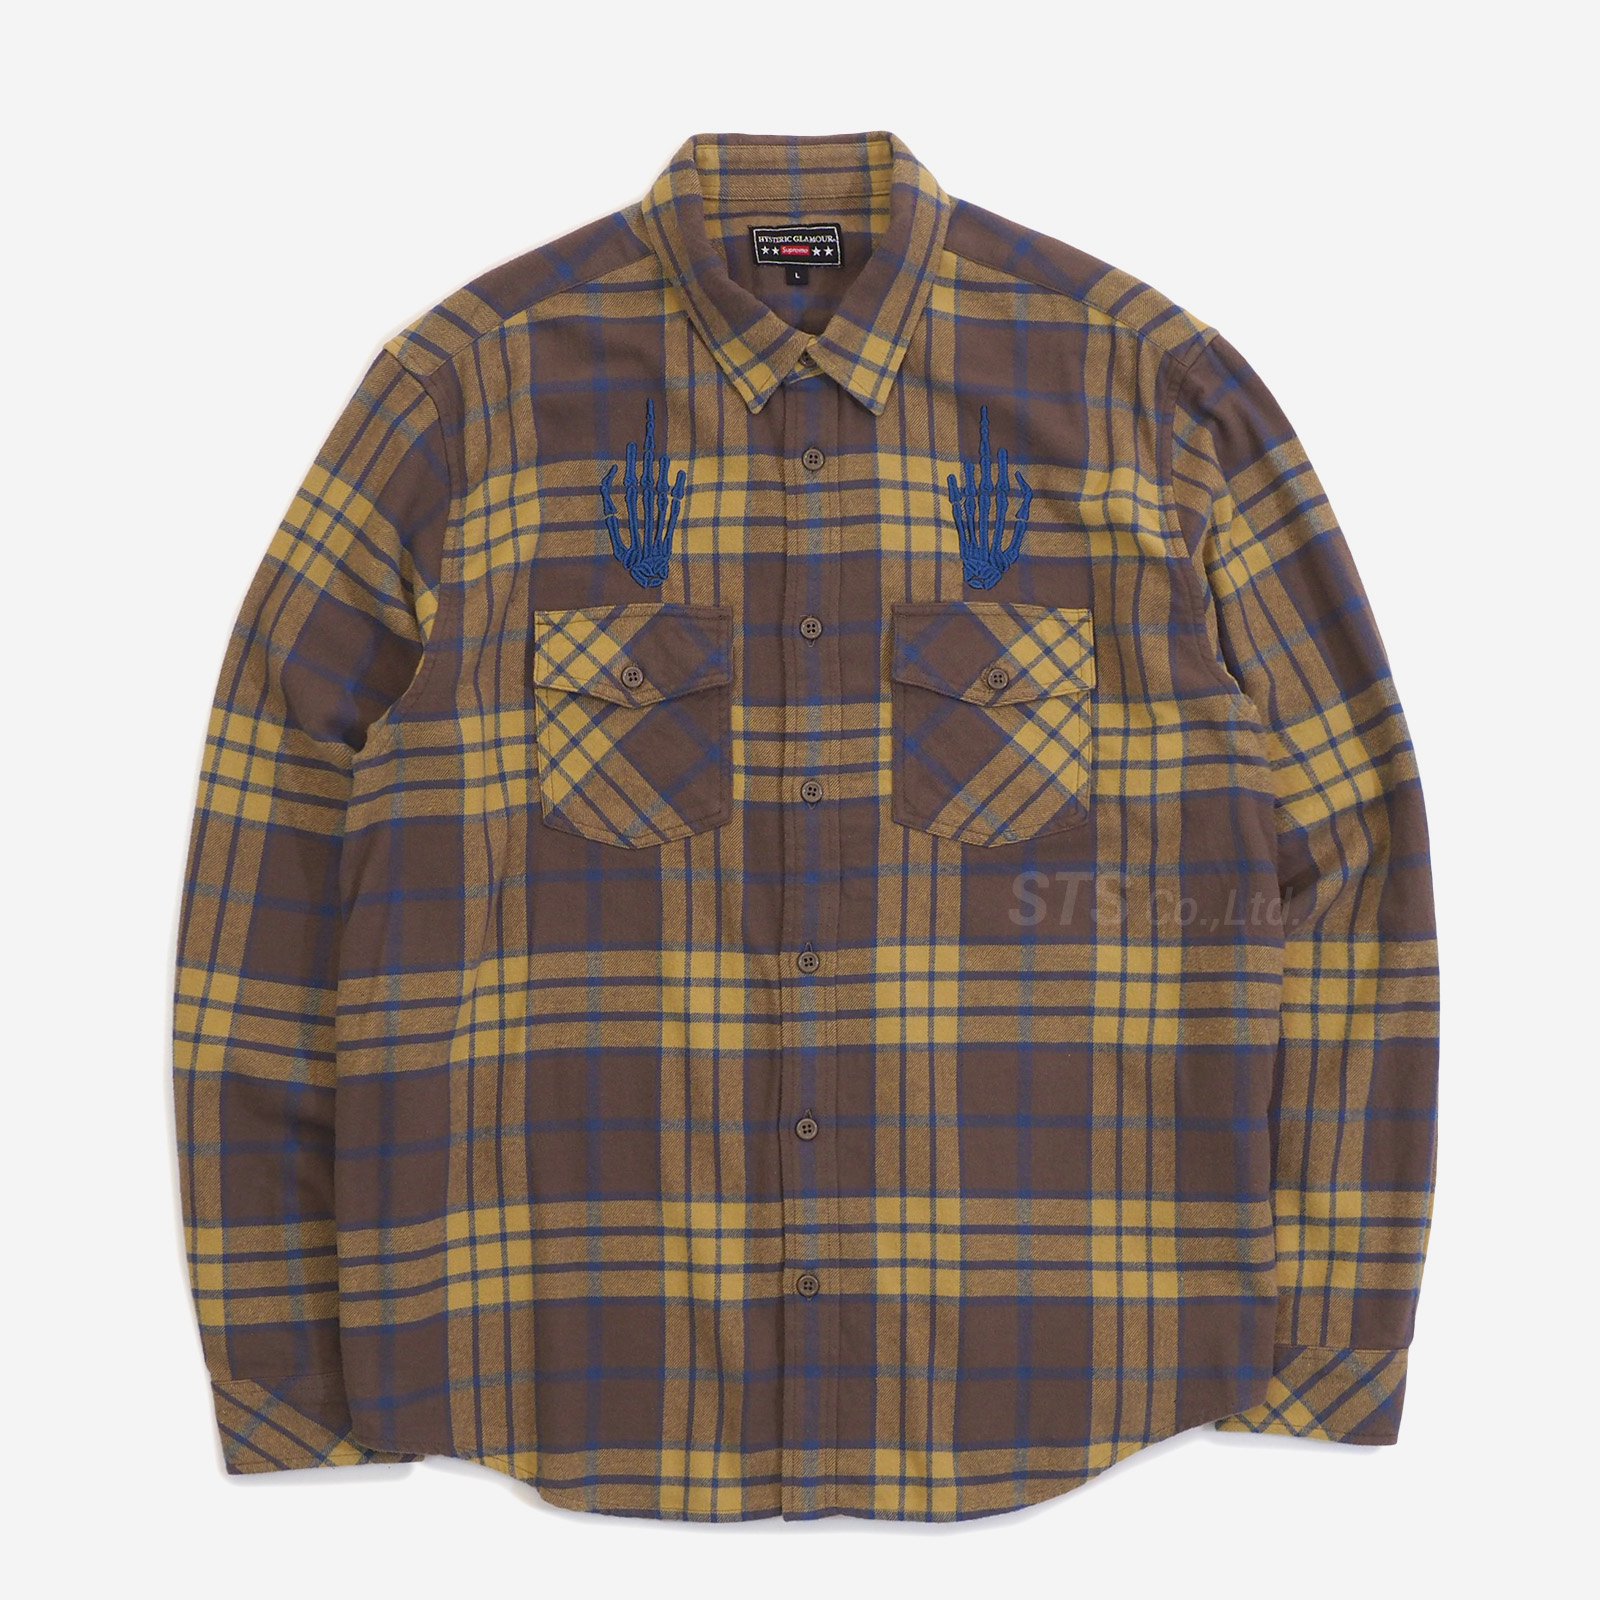 Supreme/Hysteric Glamour Plaid Flannel Shirt - ParkSIDER